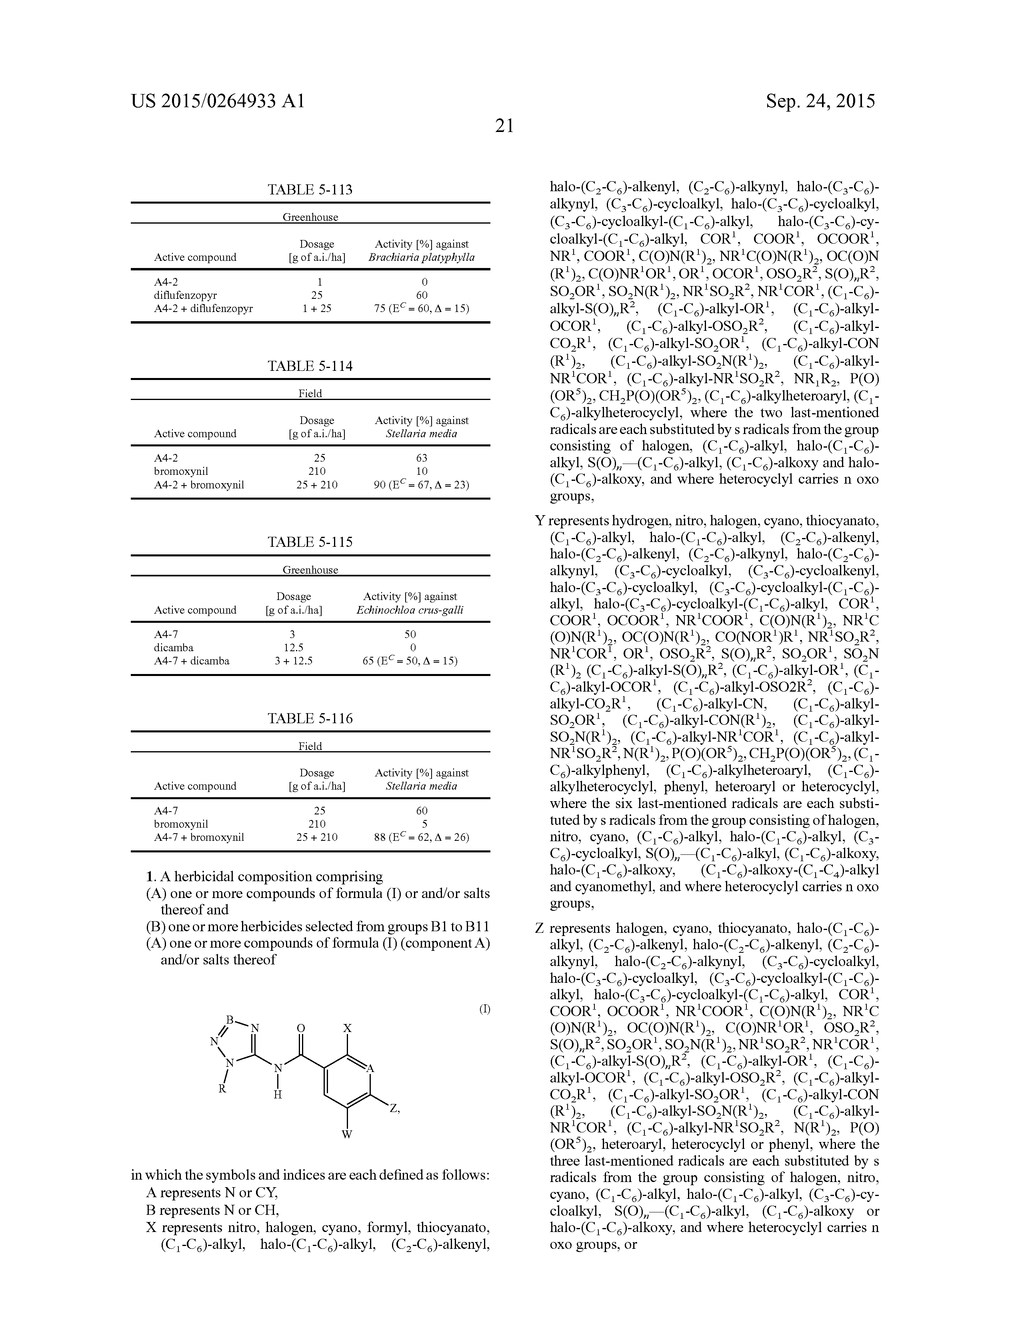 HERBICIDAL COMPOSITIONS COMPRISING N-TETRAZOL-5-YL)- OR     N-(TRIAZOL-5-YL)ARYLCARBOXAMIDES - diagram, schematic, and image 22